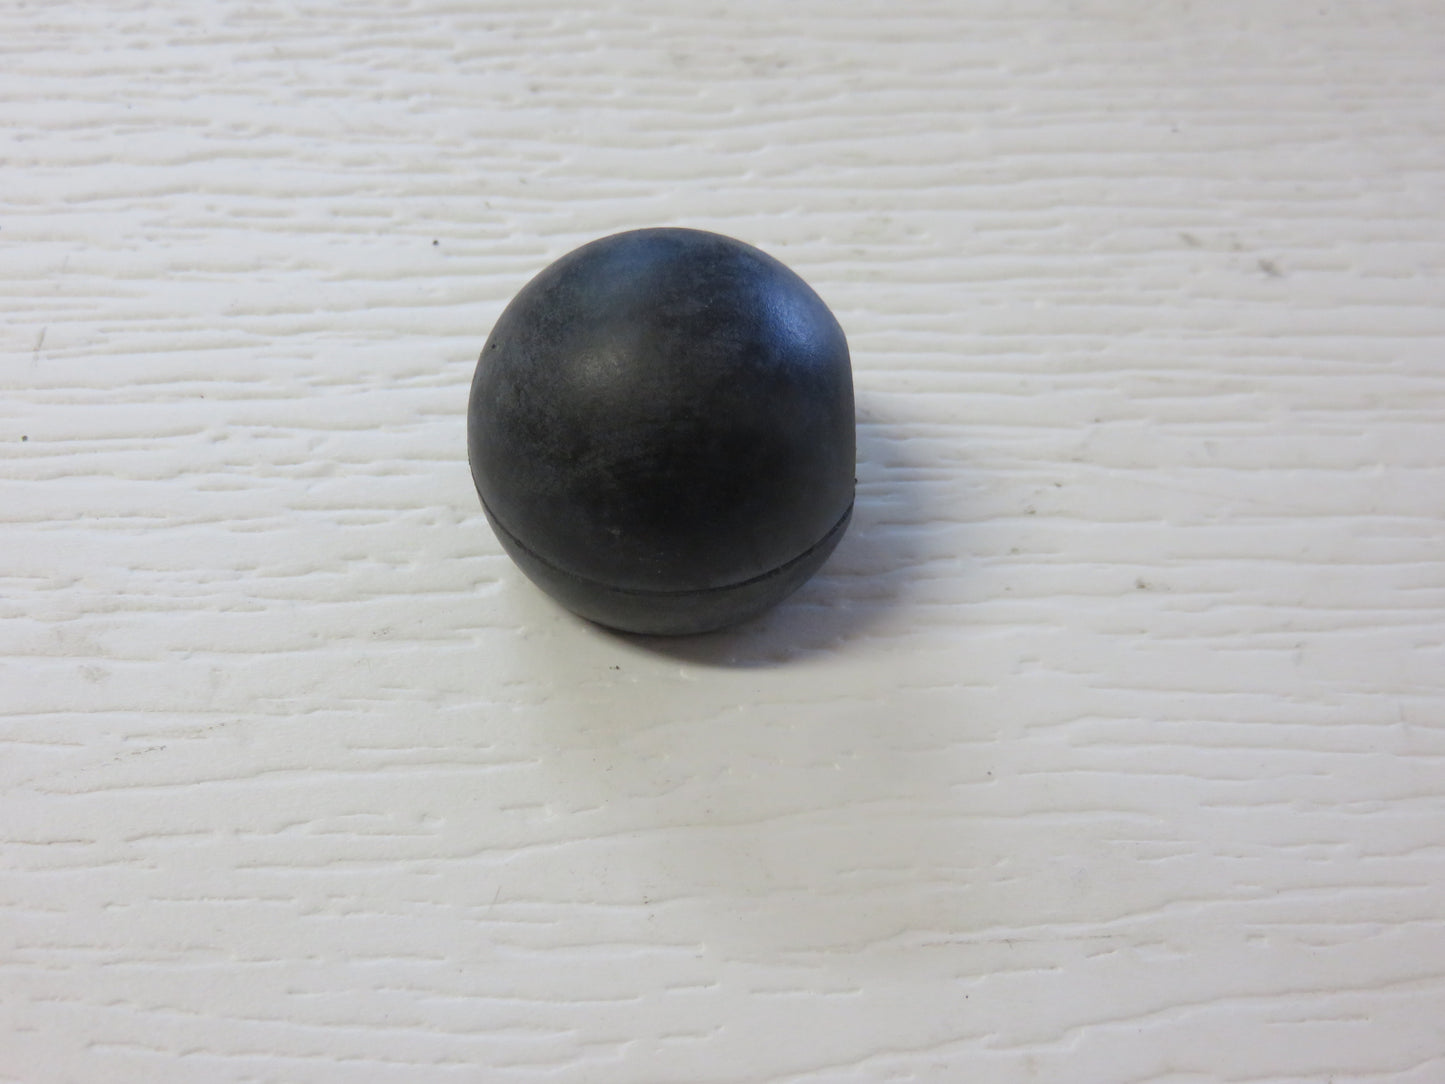 R44695 John Deere Single Or Triple Selective Control Lever Knob For 2520, 3020, 4000, 4020, 4320, 4520, 4620, 7020